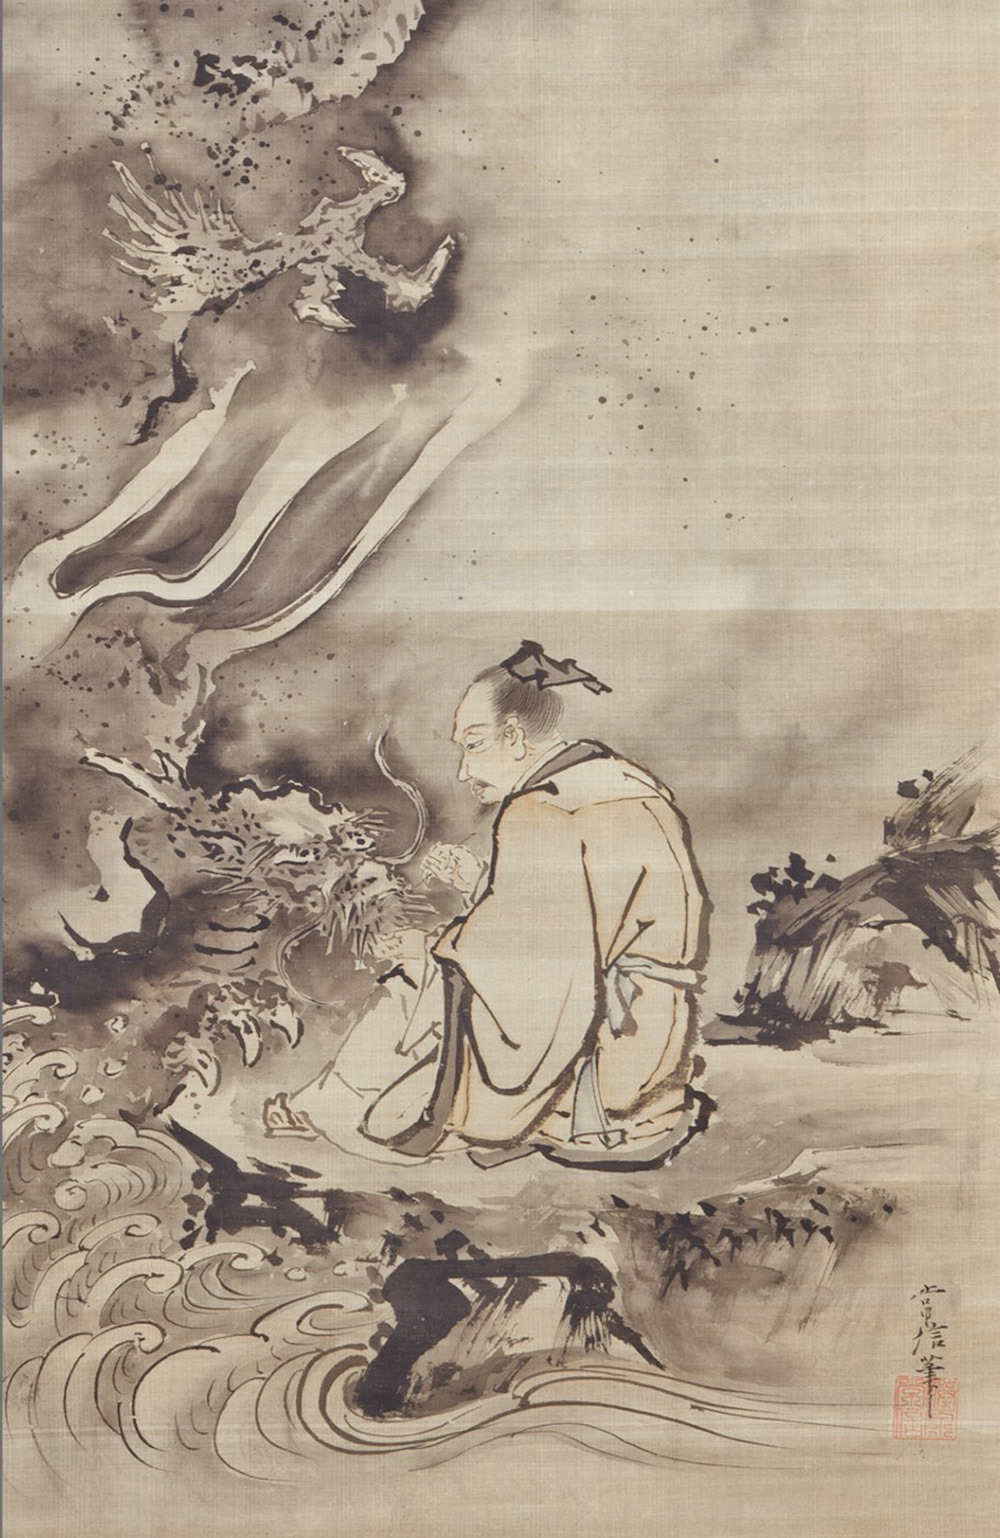 Detail of a hanging scroll featuring a kneeling man in robes and a dragon head rising out of waves